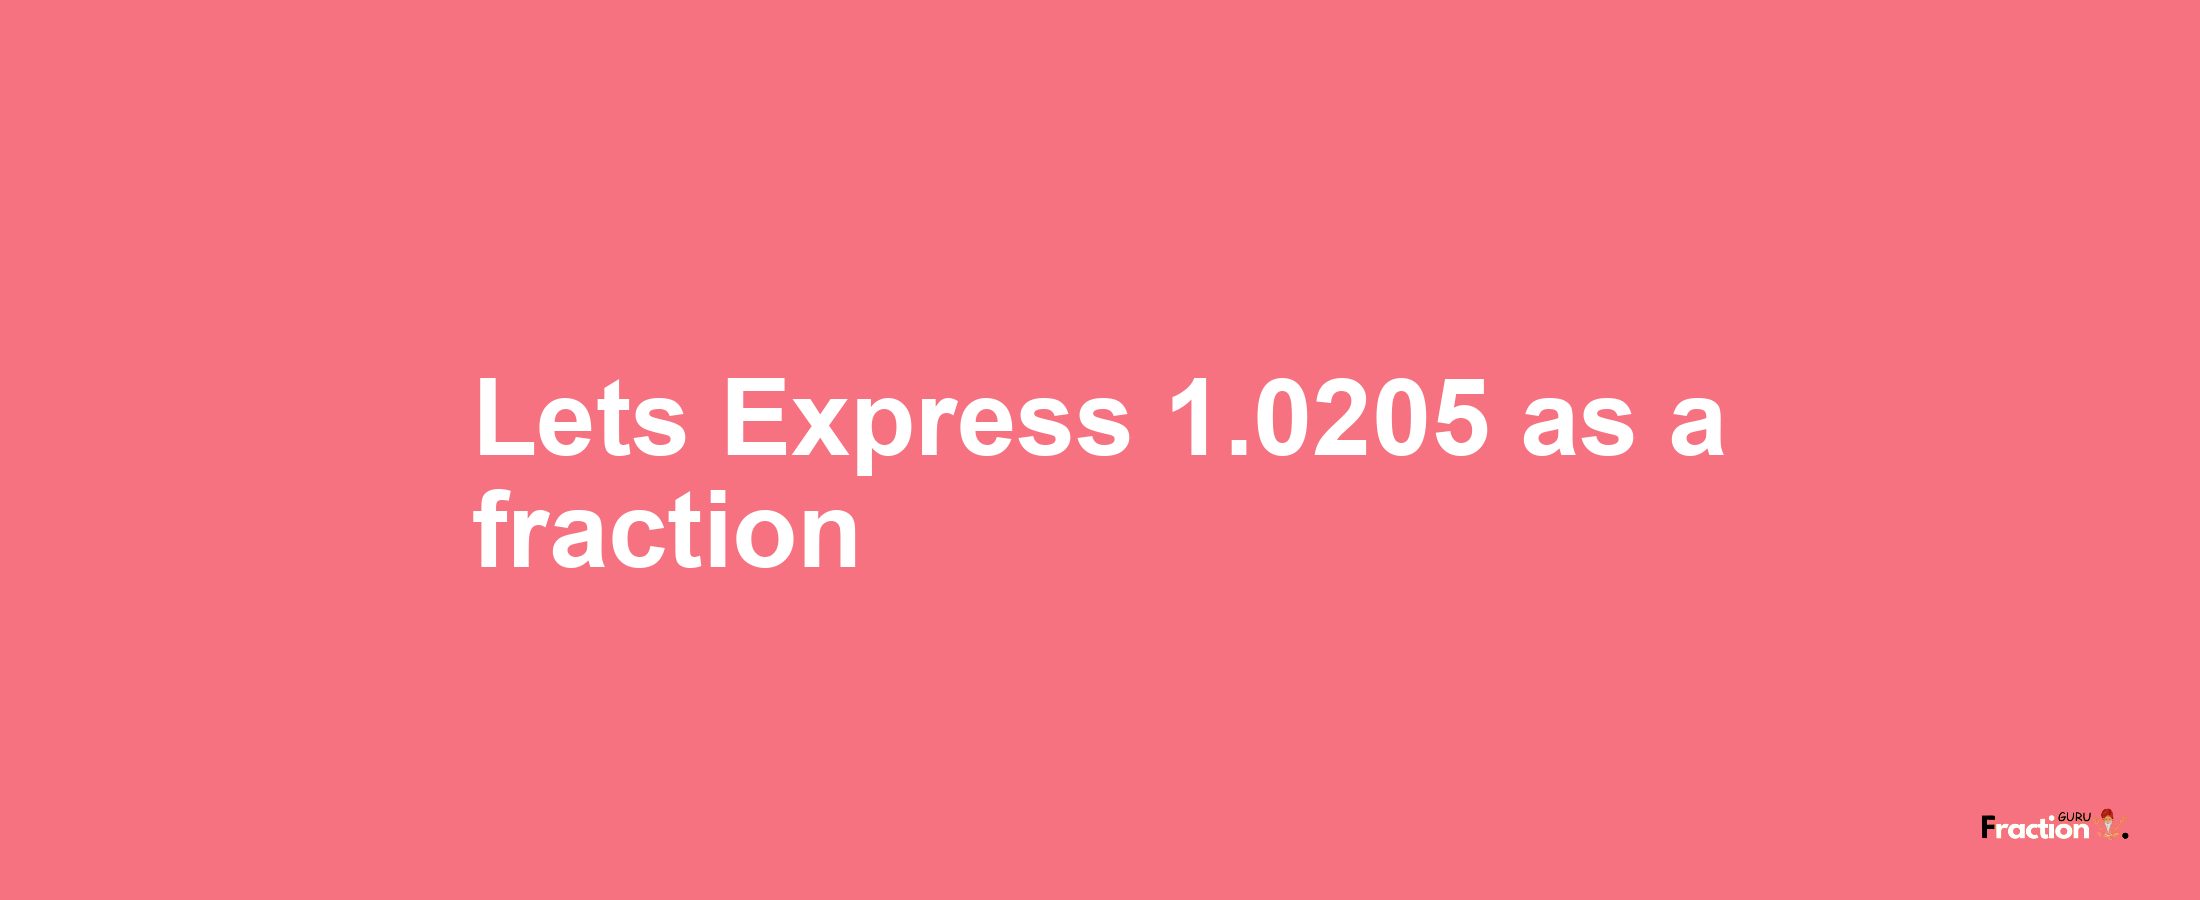 Lets Express 1.0205 as afraction